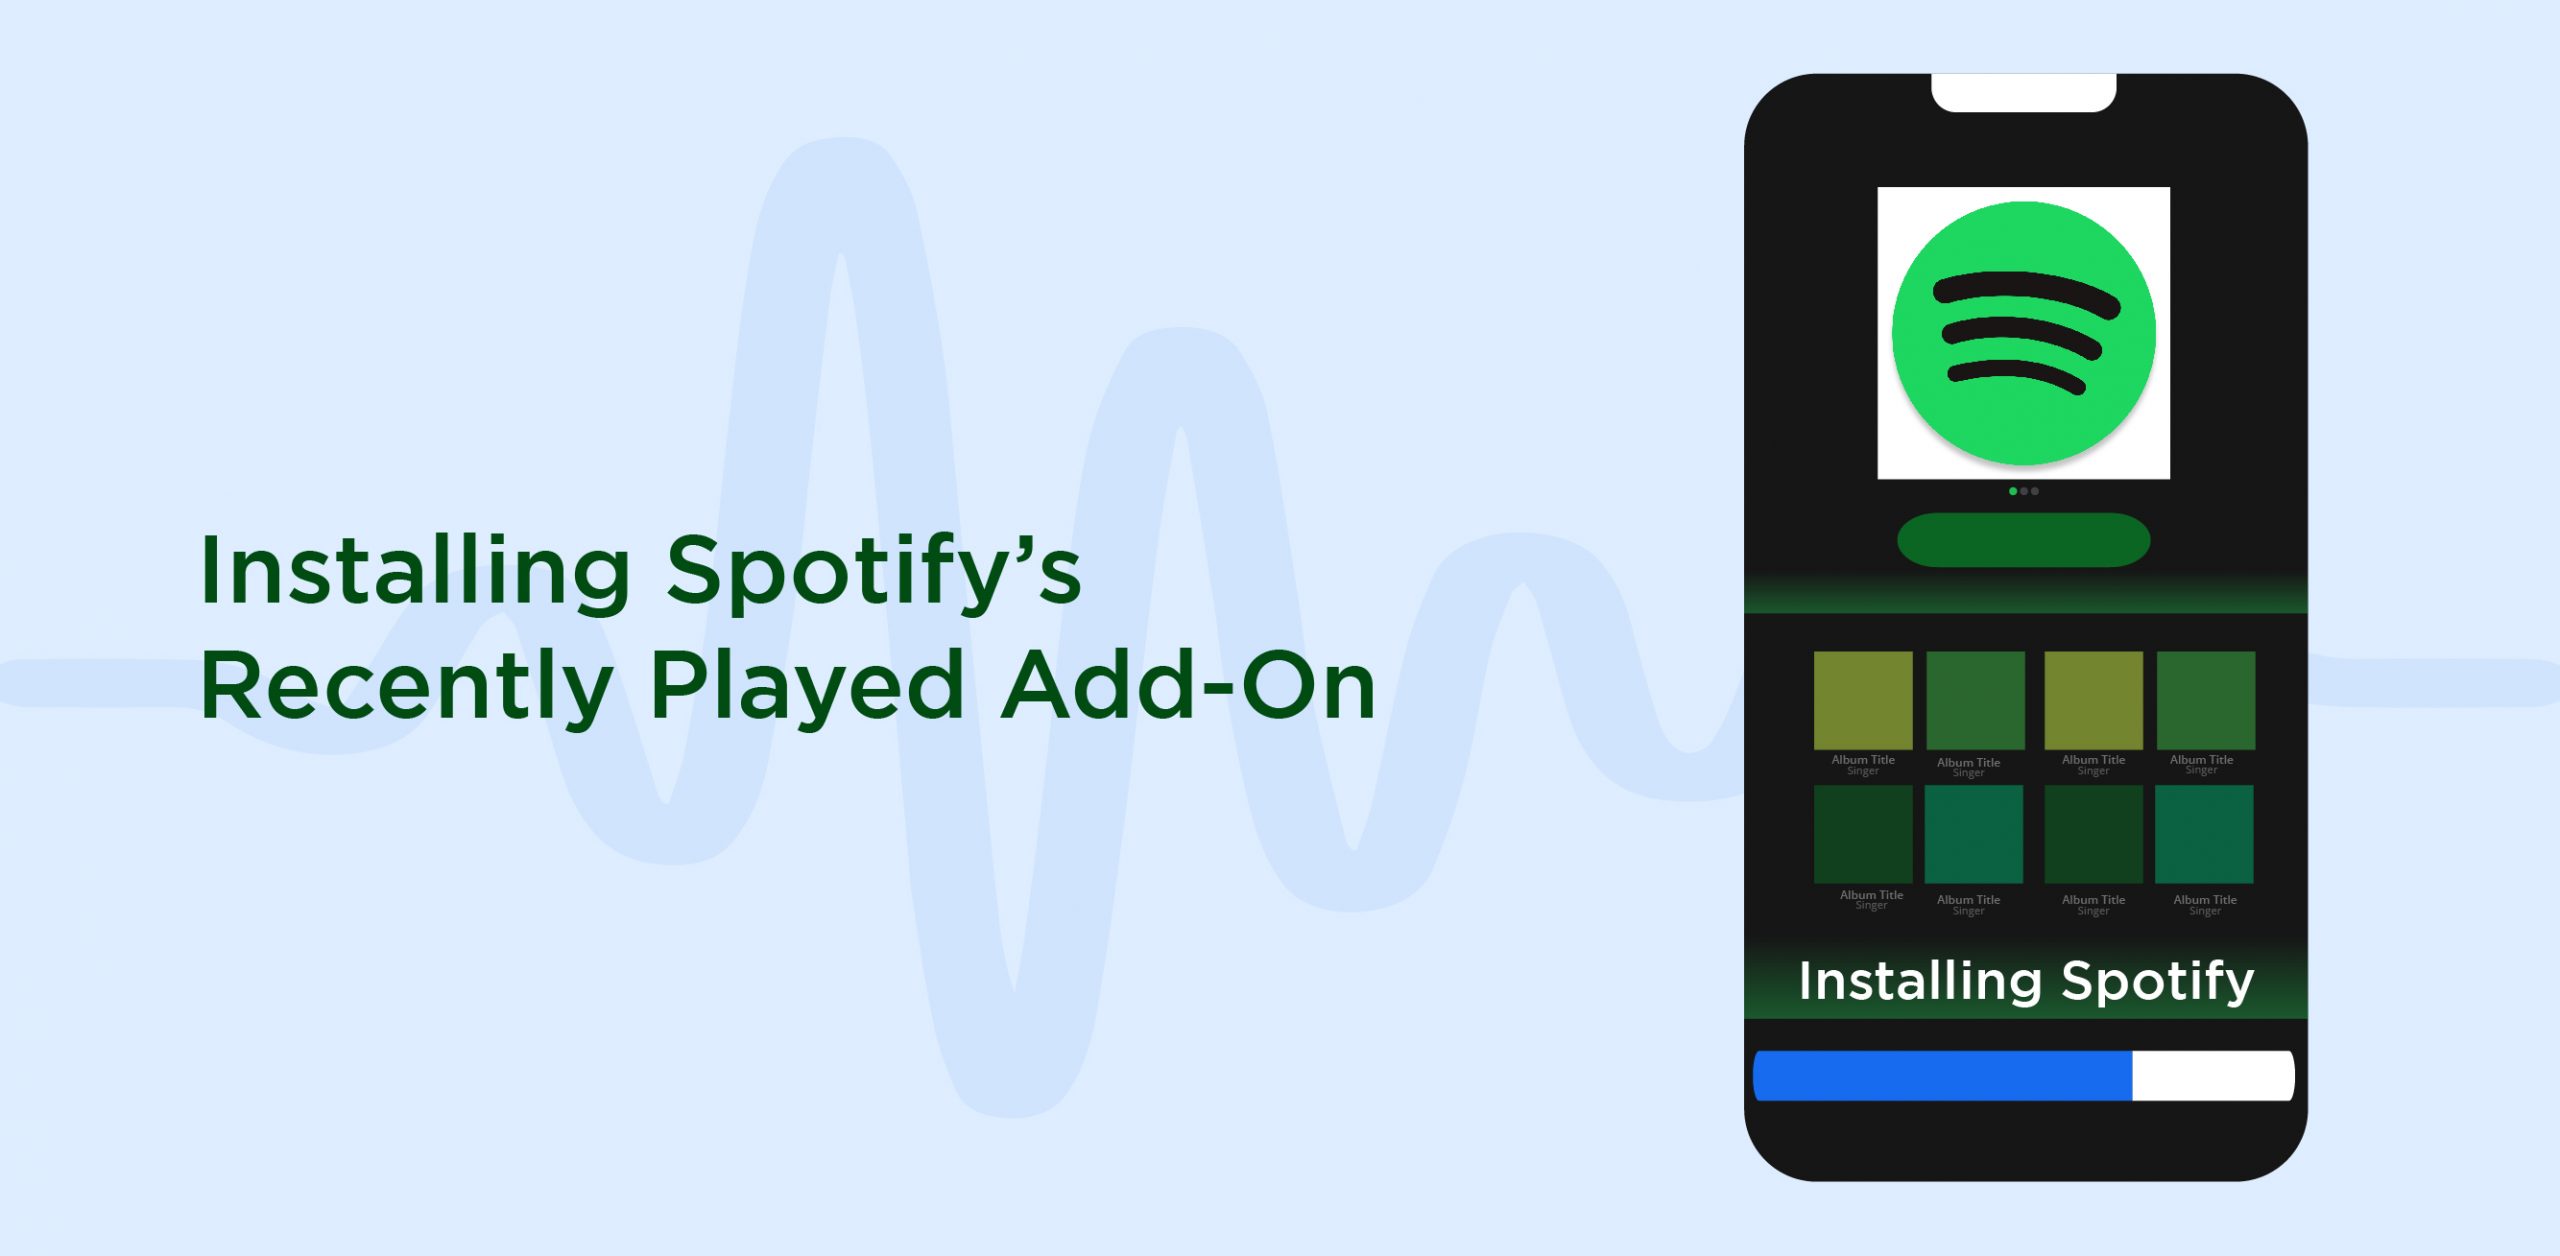 Installing Spotify's Recently Played Add-On